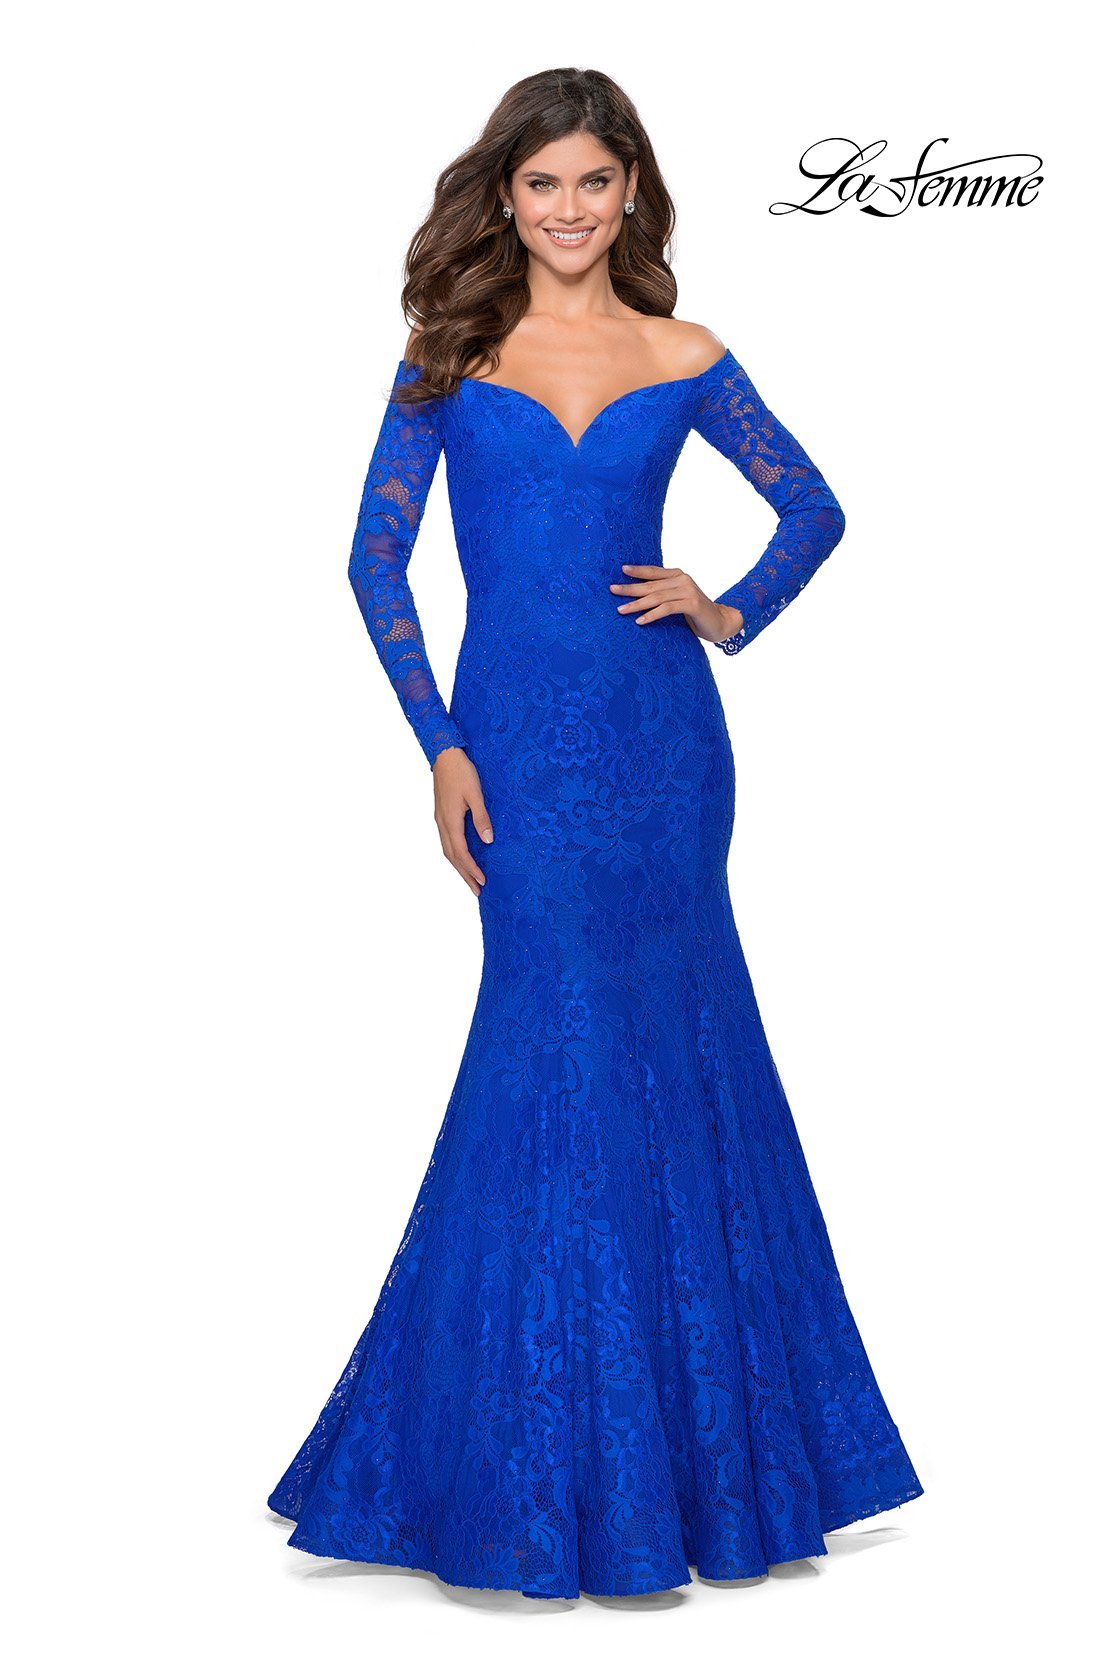 La Femme 28569 dress images in these colors: Black, Red, Royal Blue, White Nude.